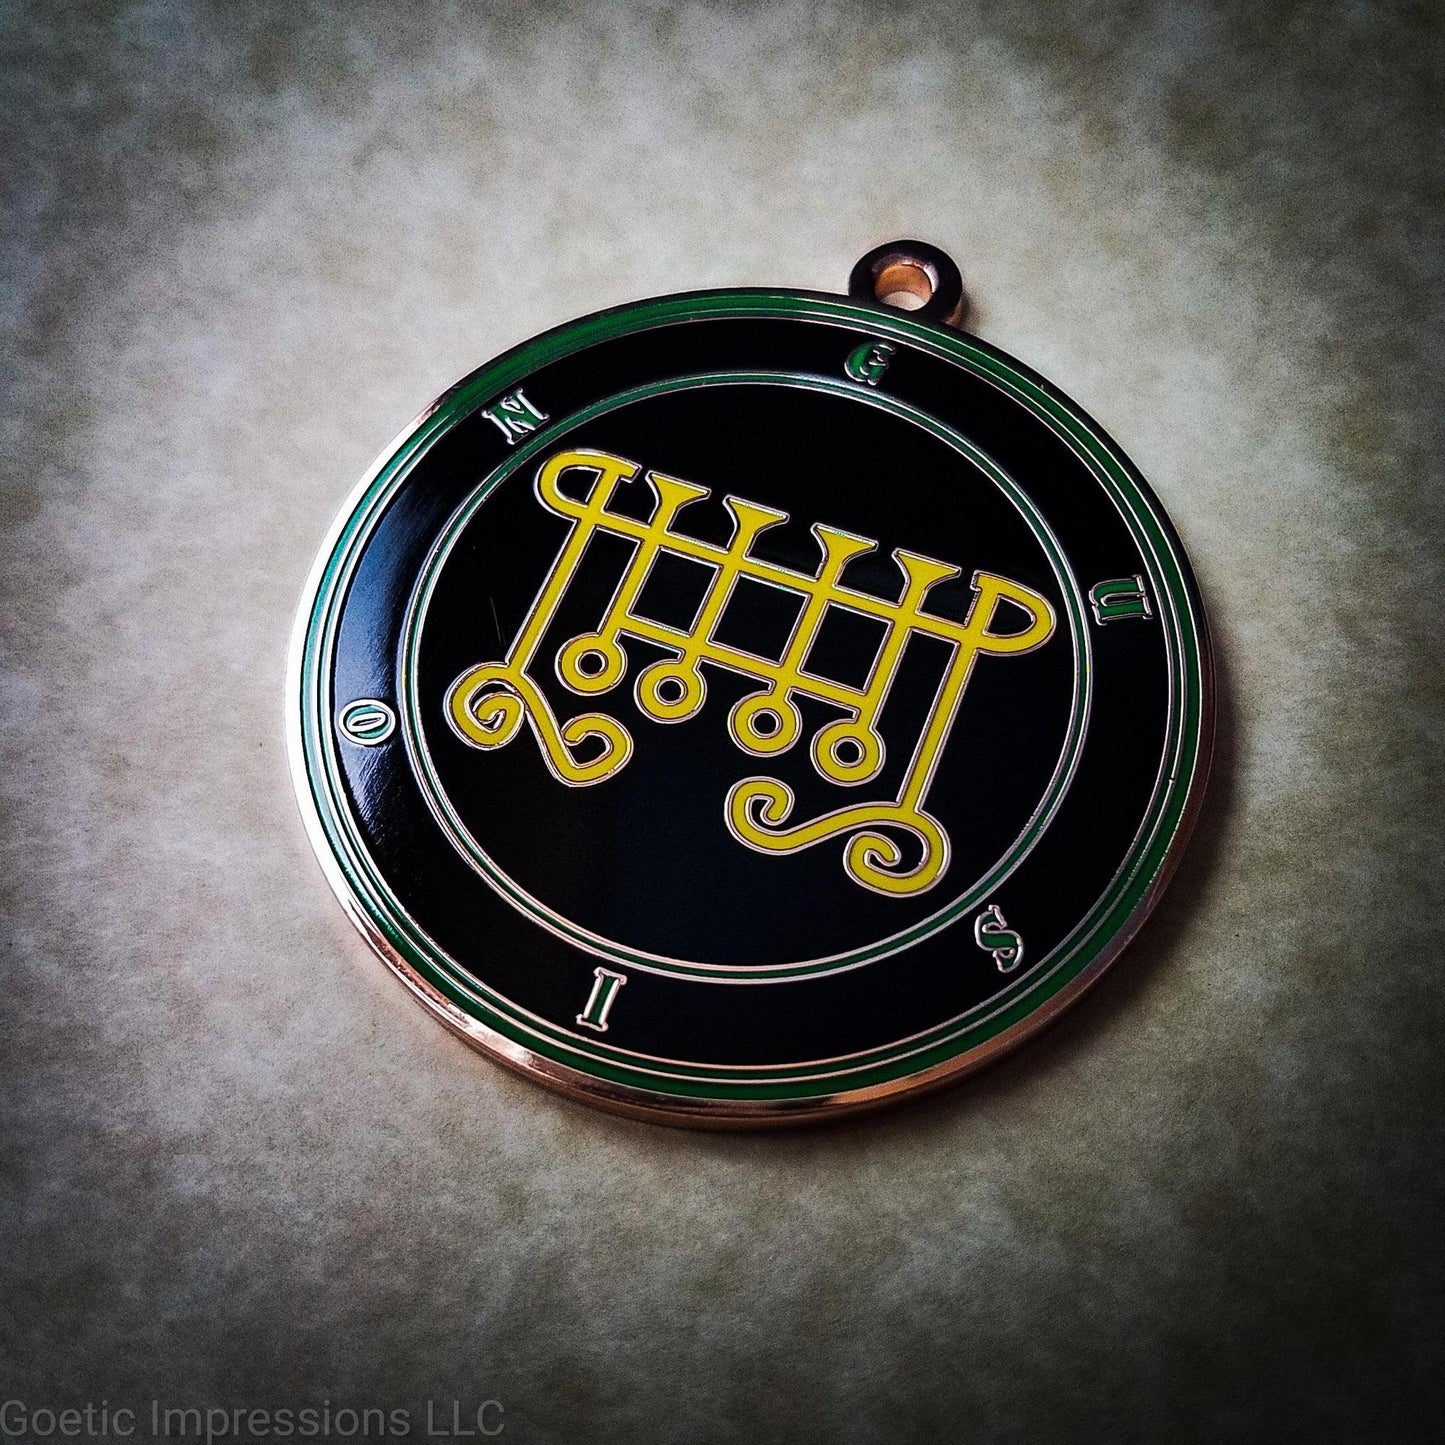 Talisman of goetic spirit Gusion. Gusion's sigil is yellow with the circles surrounding in green along with the name on a black background. 